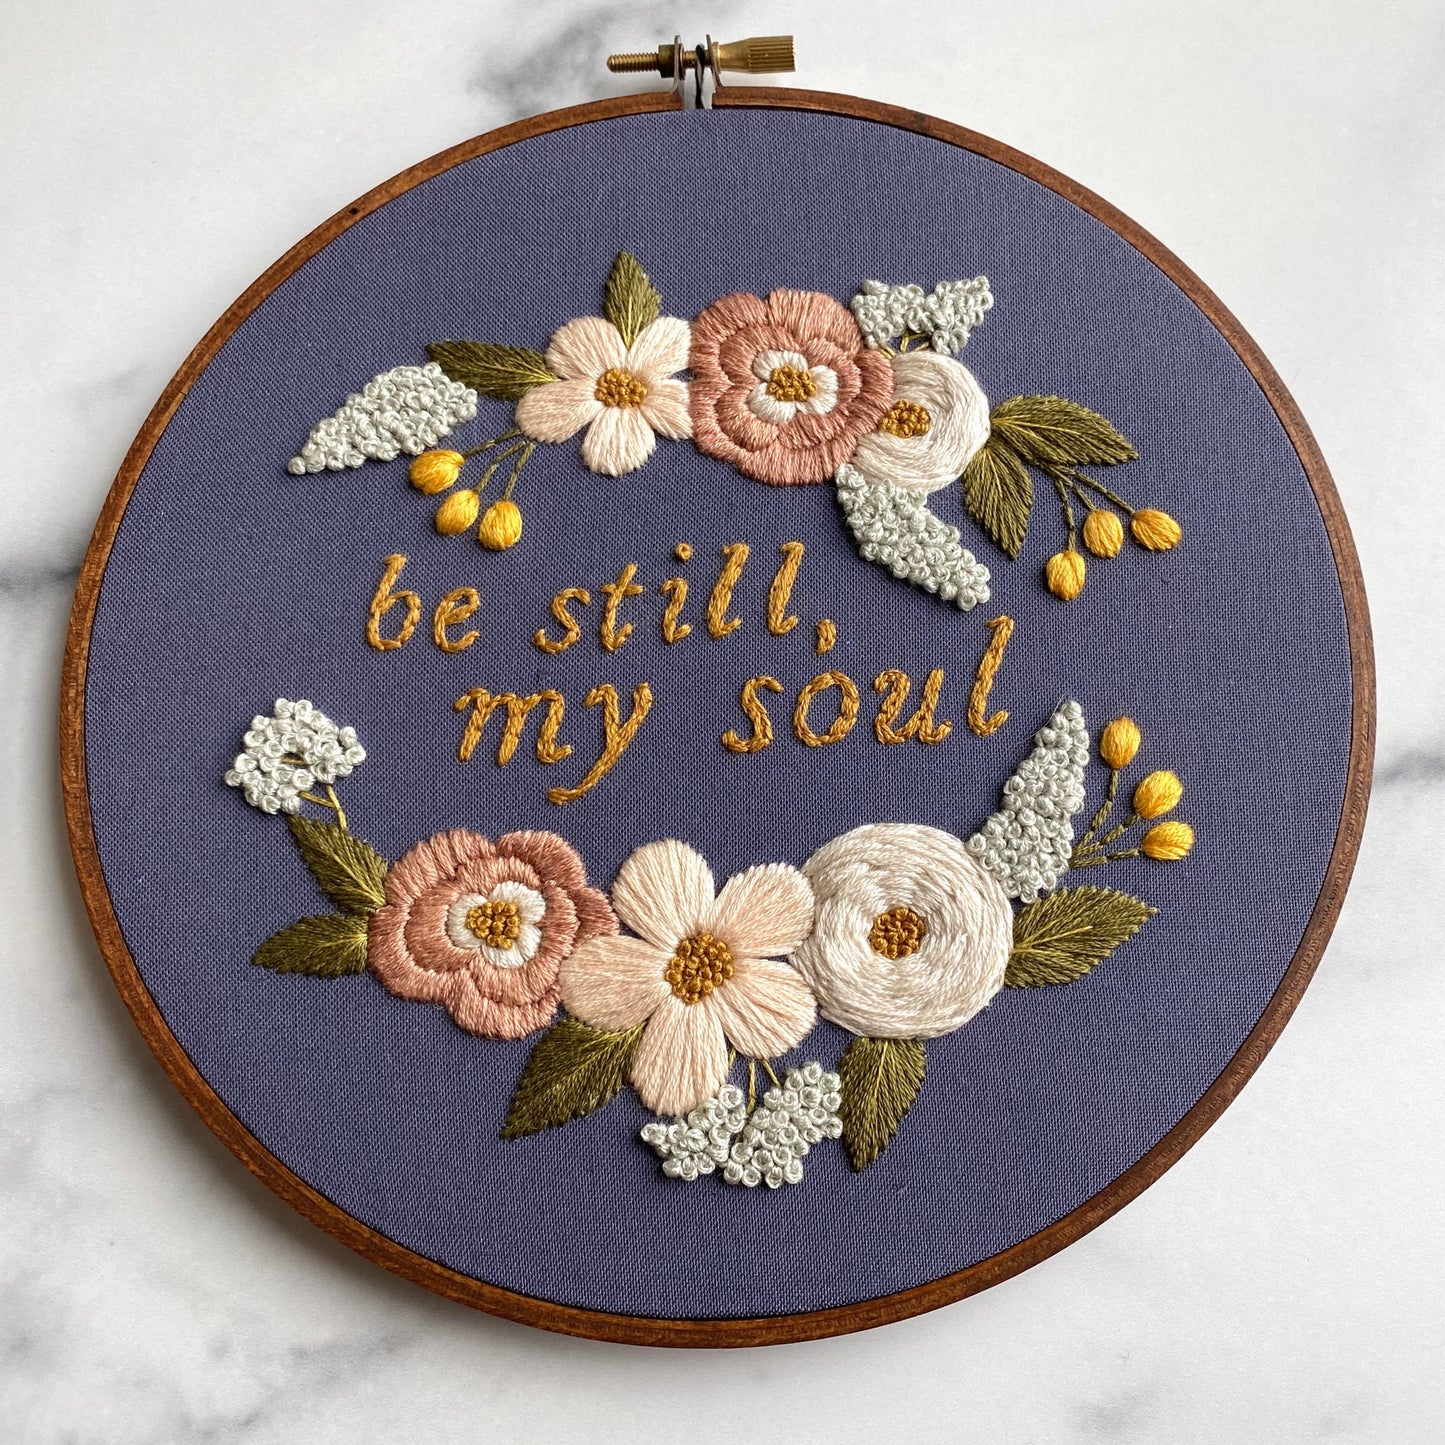 Hand Embroidery Kit - "Be Still My Soul"